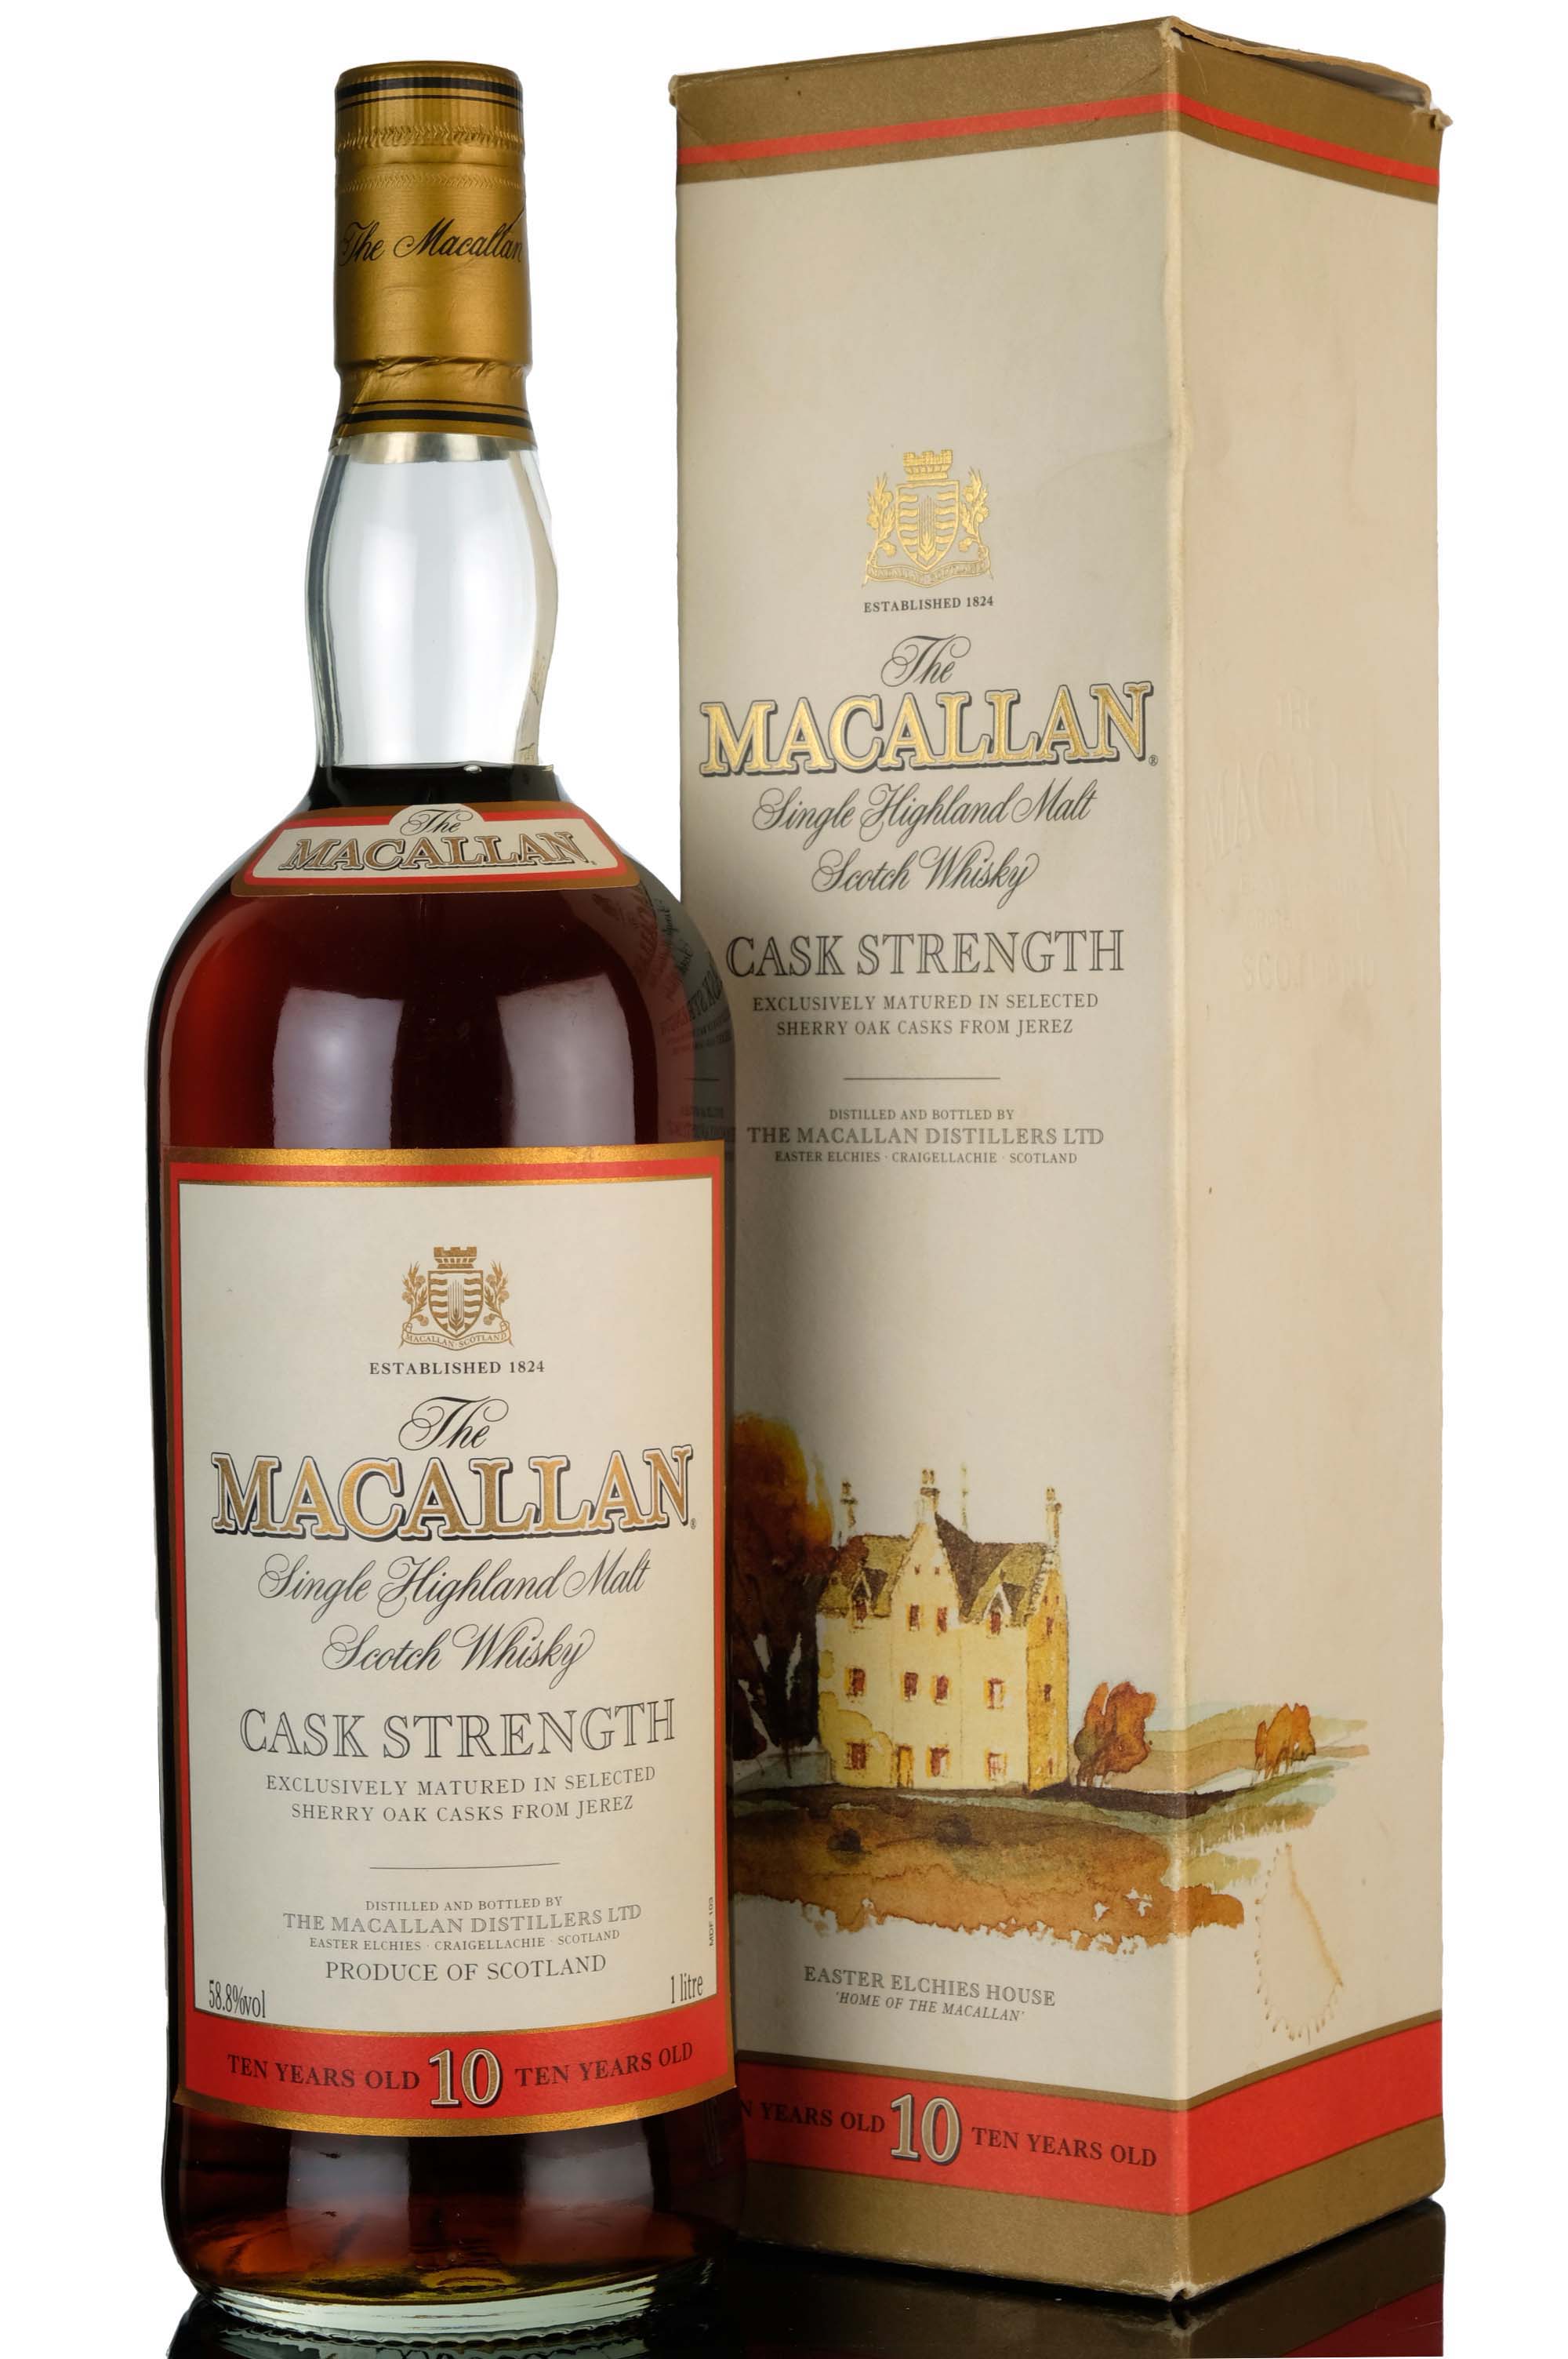 Macallan 10 Year Old - Sherry Cask - Cask Strength 58.8% - Early 2000s - 1 Litre